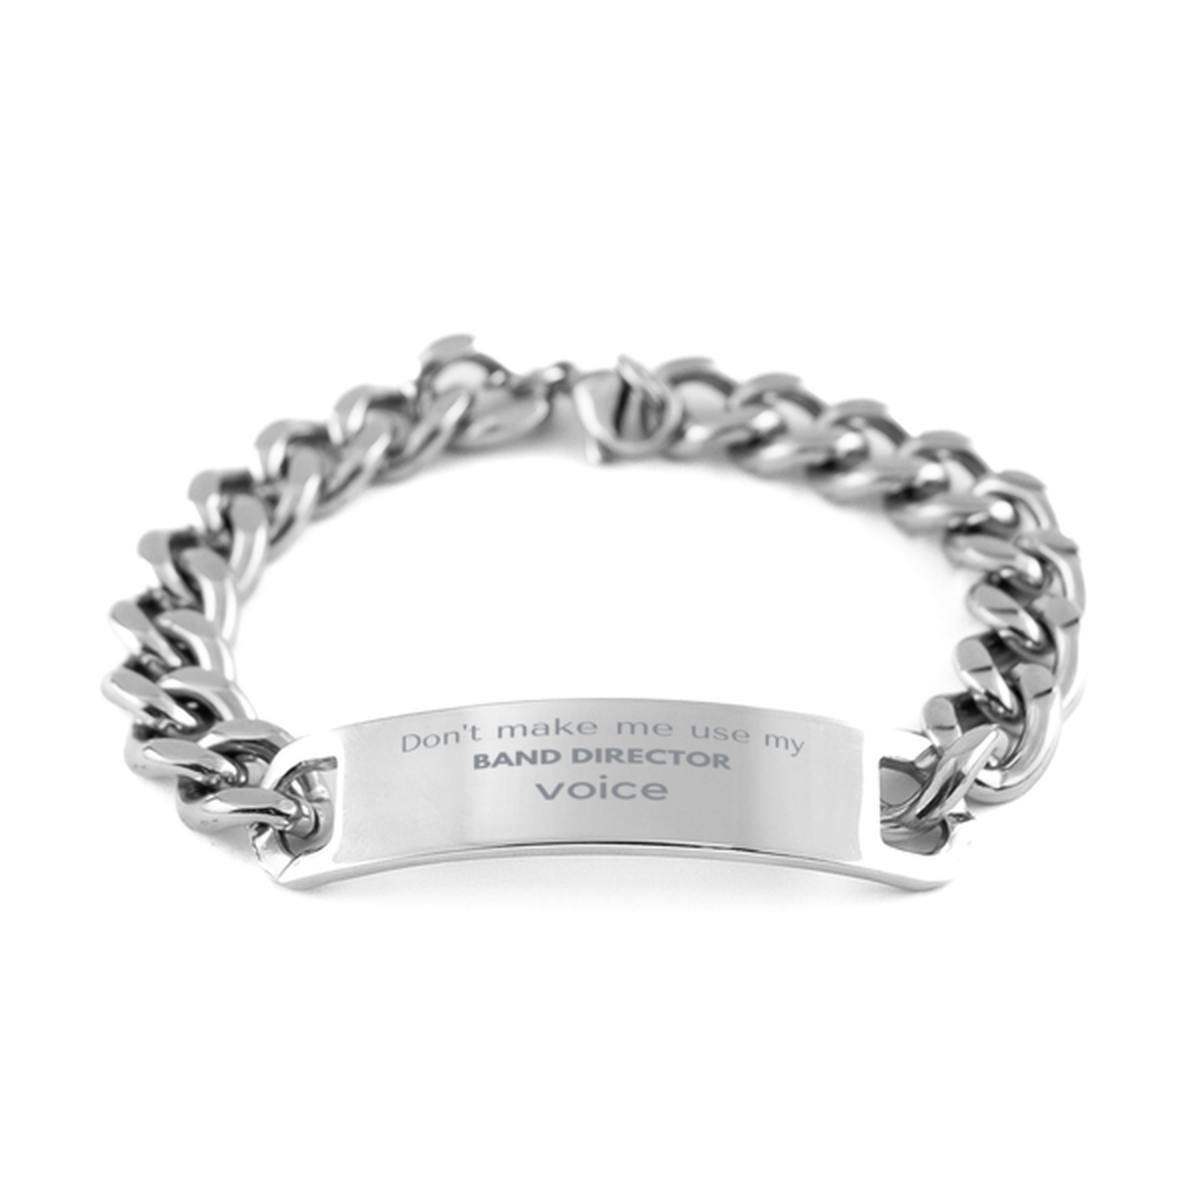 Don't make me use my Band Director voice, Sarcasm Band Director Gifts, Christmas Band Director Cuban Chain Stainless Steel Bracelet Birthday Unique Gifts For Band Director Coworkers, Men, Women, Colleague, Friends